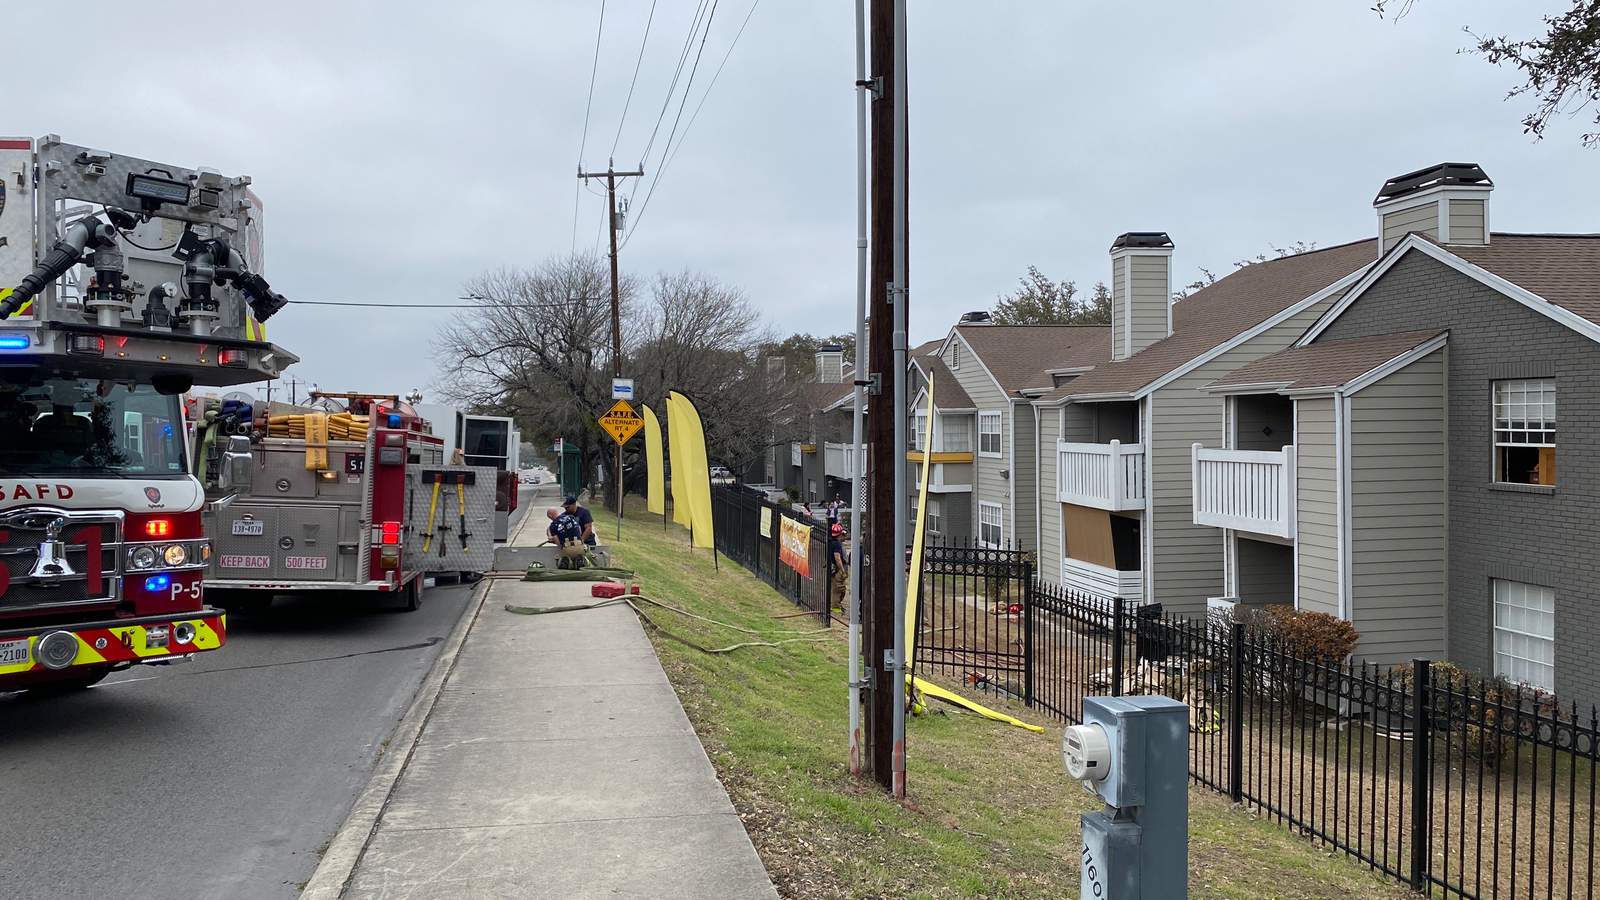 Oven sparks fire at apartment complex on San Antonio’s North Side